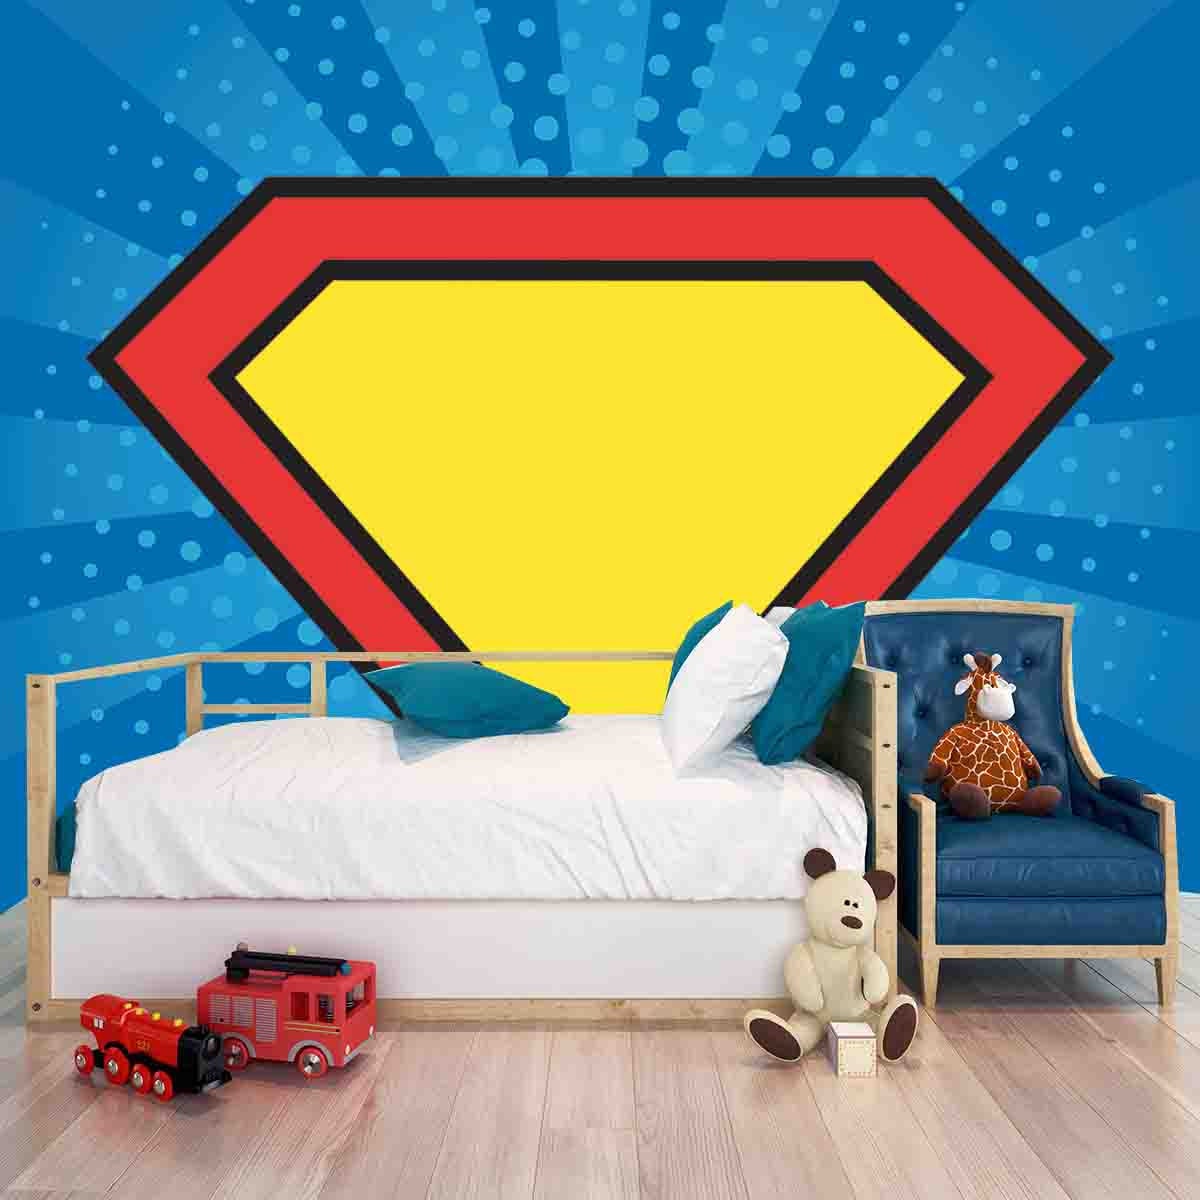 Boys Blue, Red and Yellow Superhero Sign Wallpaper Bedroom Mural